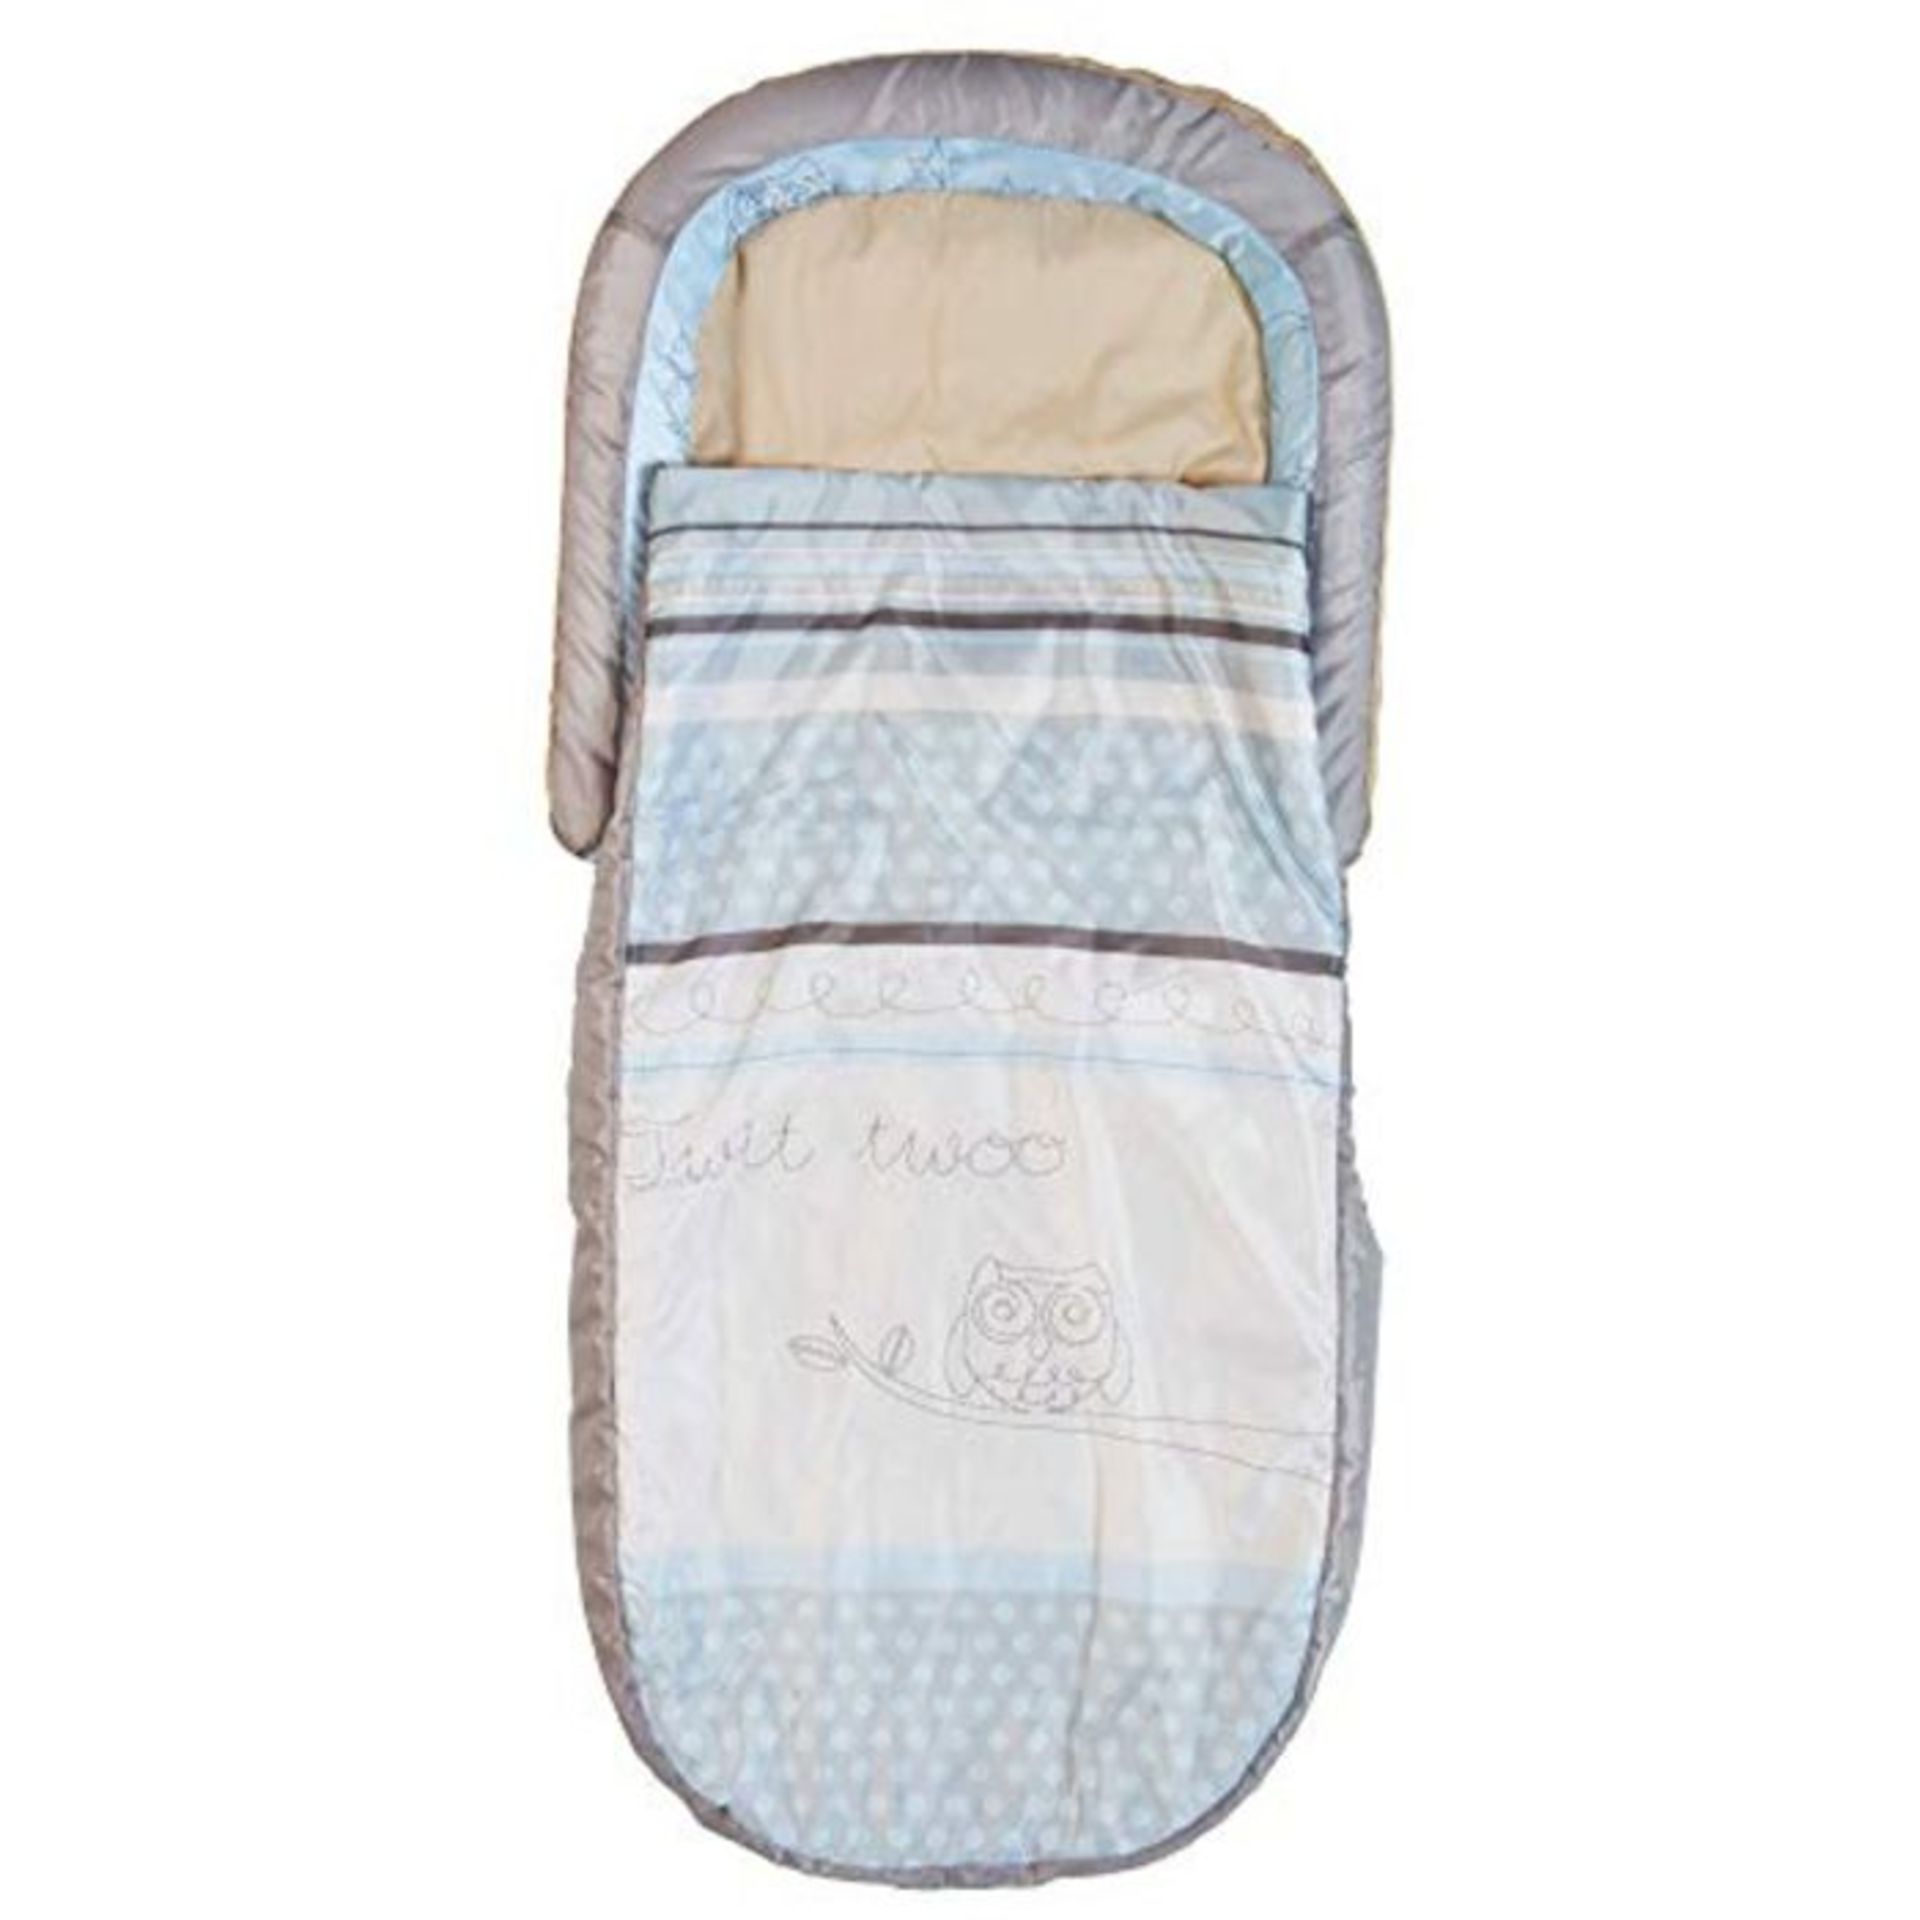 Sleepytime Owl My First ReadyBed - Inflatable Toddler Air Bed and Sleeping Bag in one,